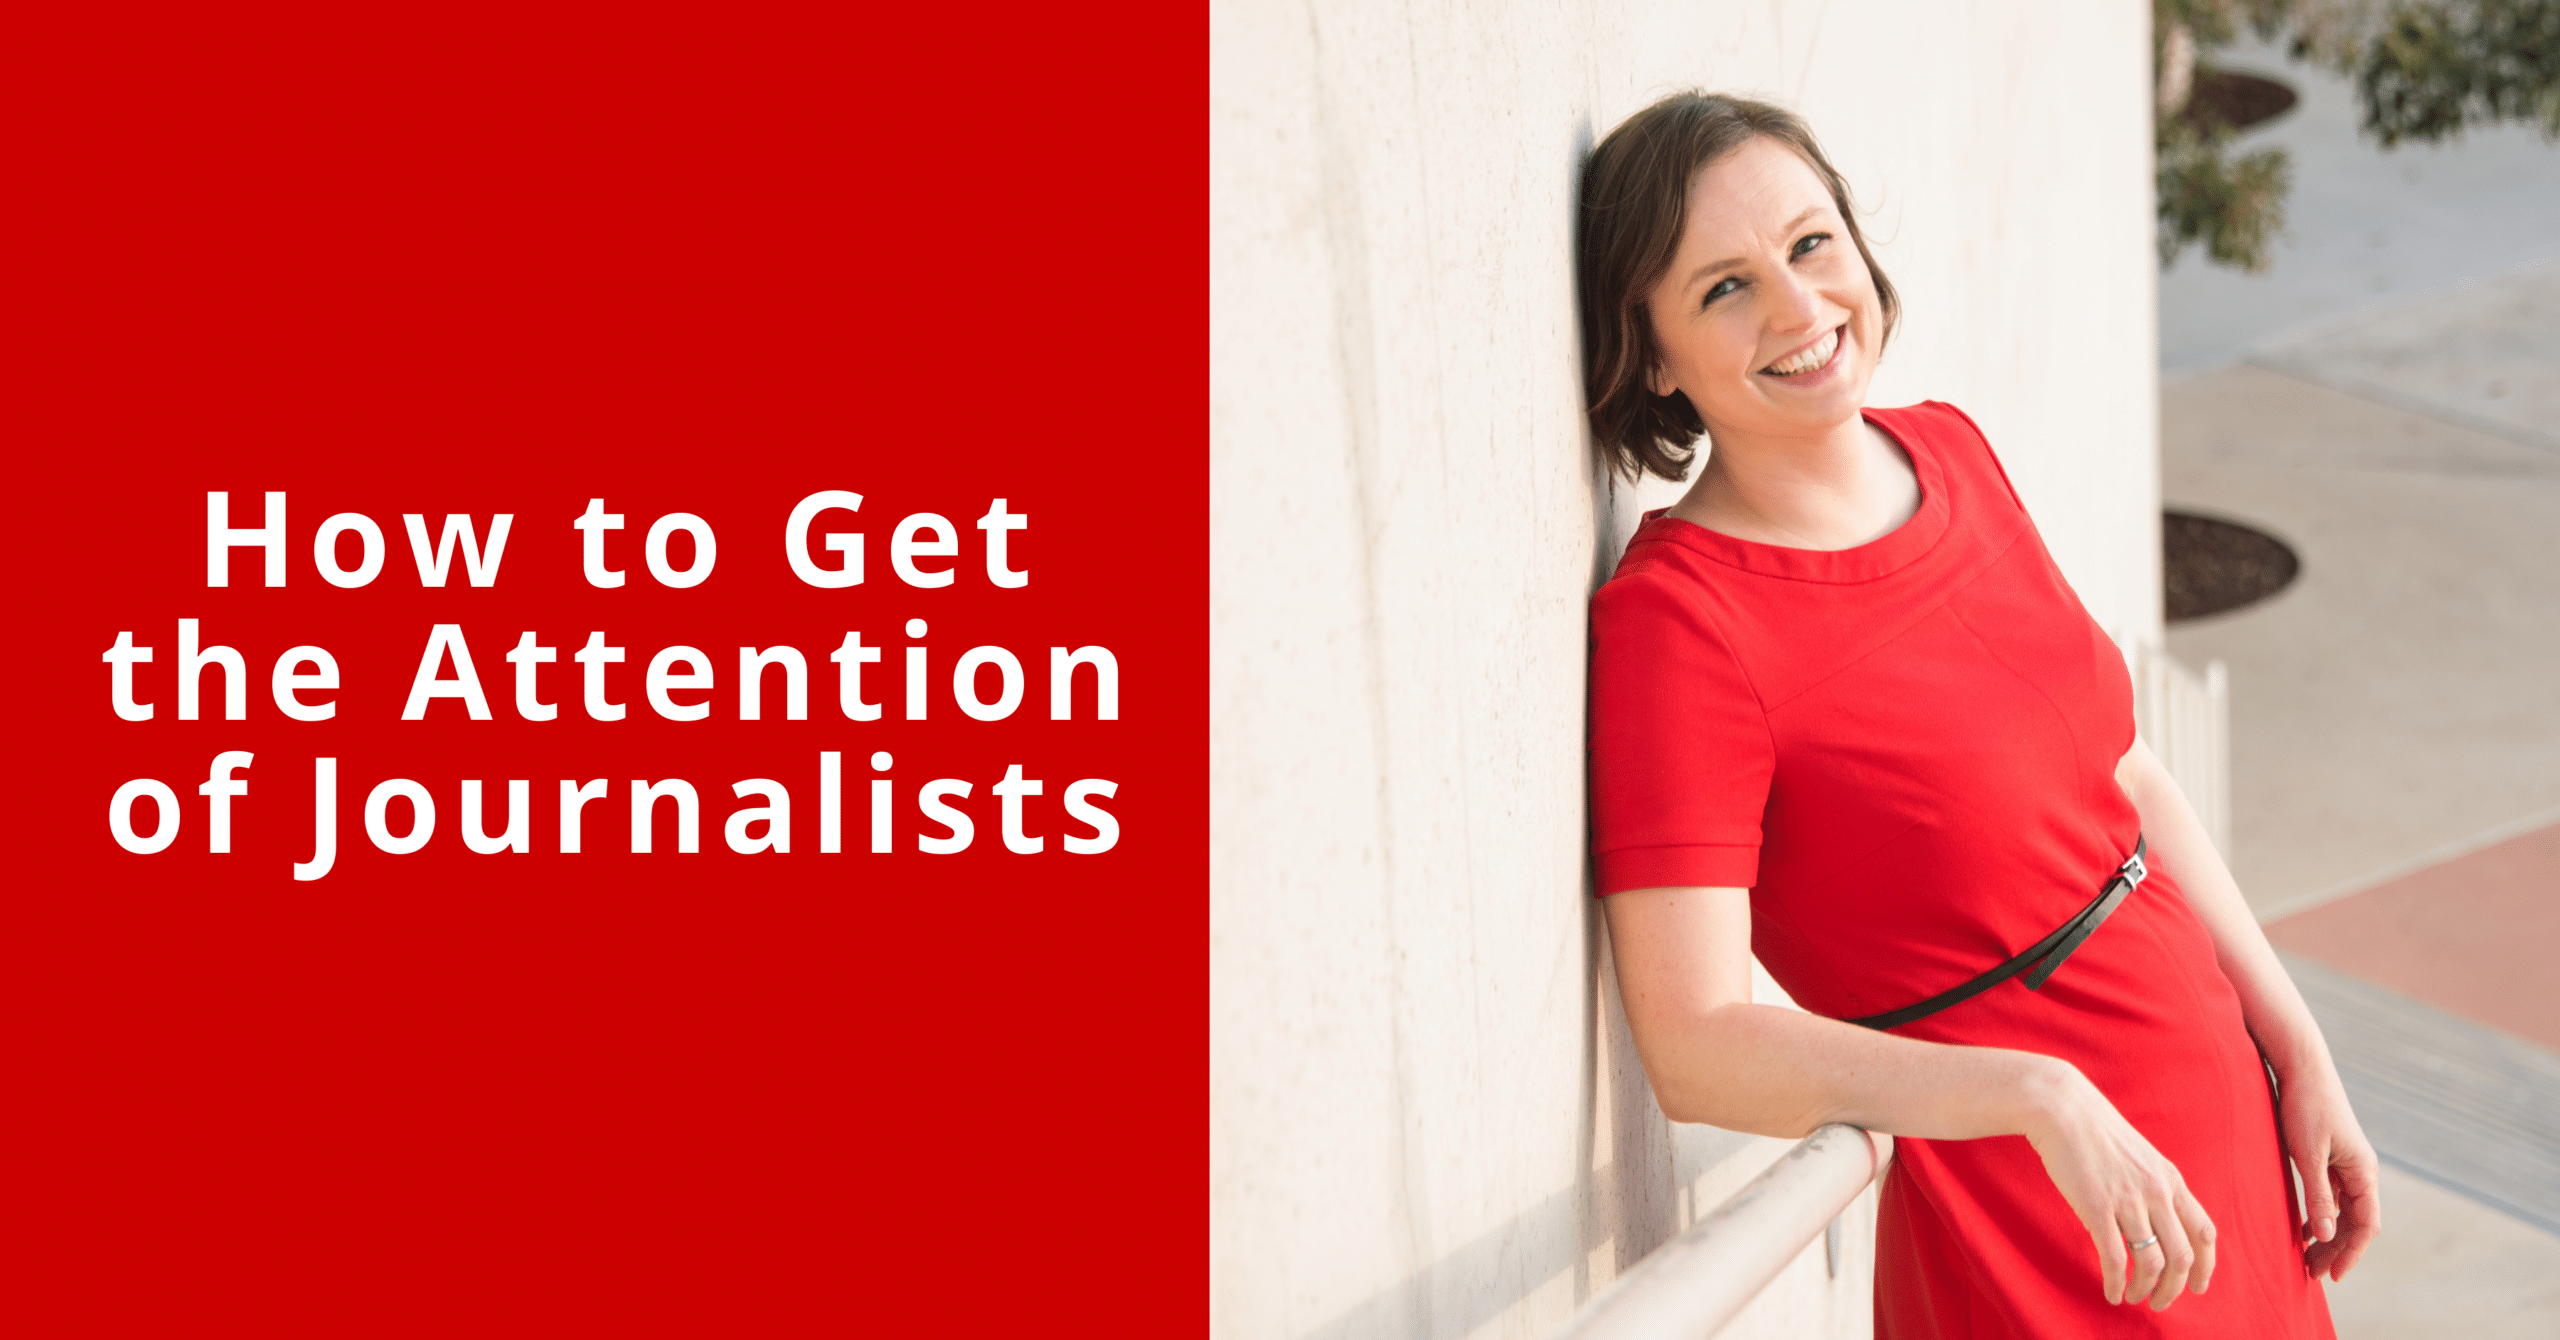 How to Get the Attention of Journalists with Marike Frick